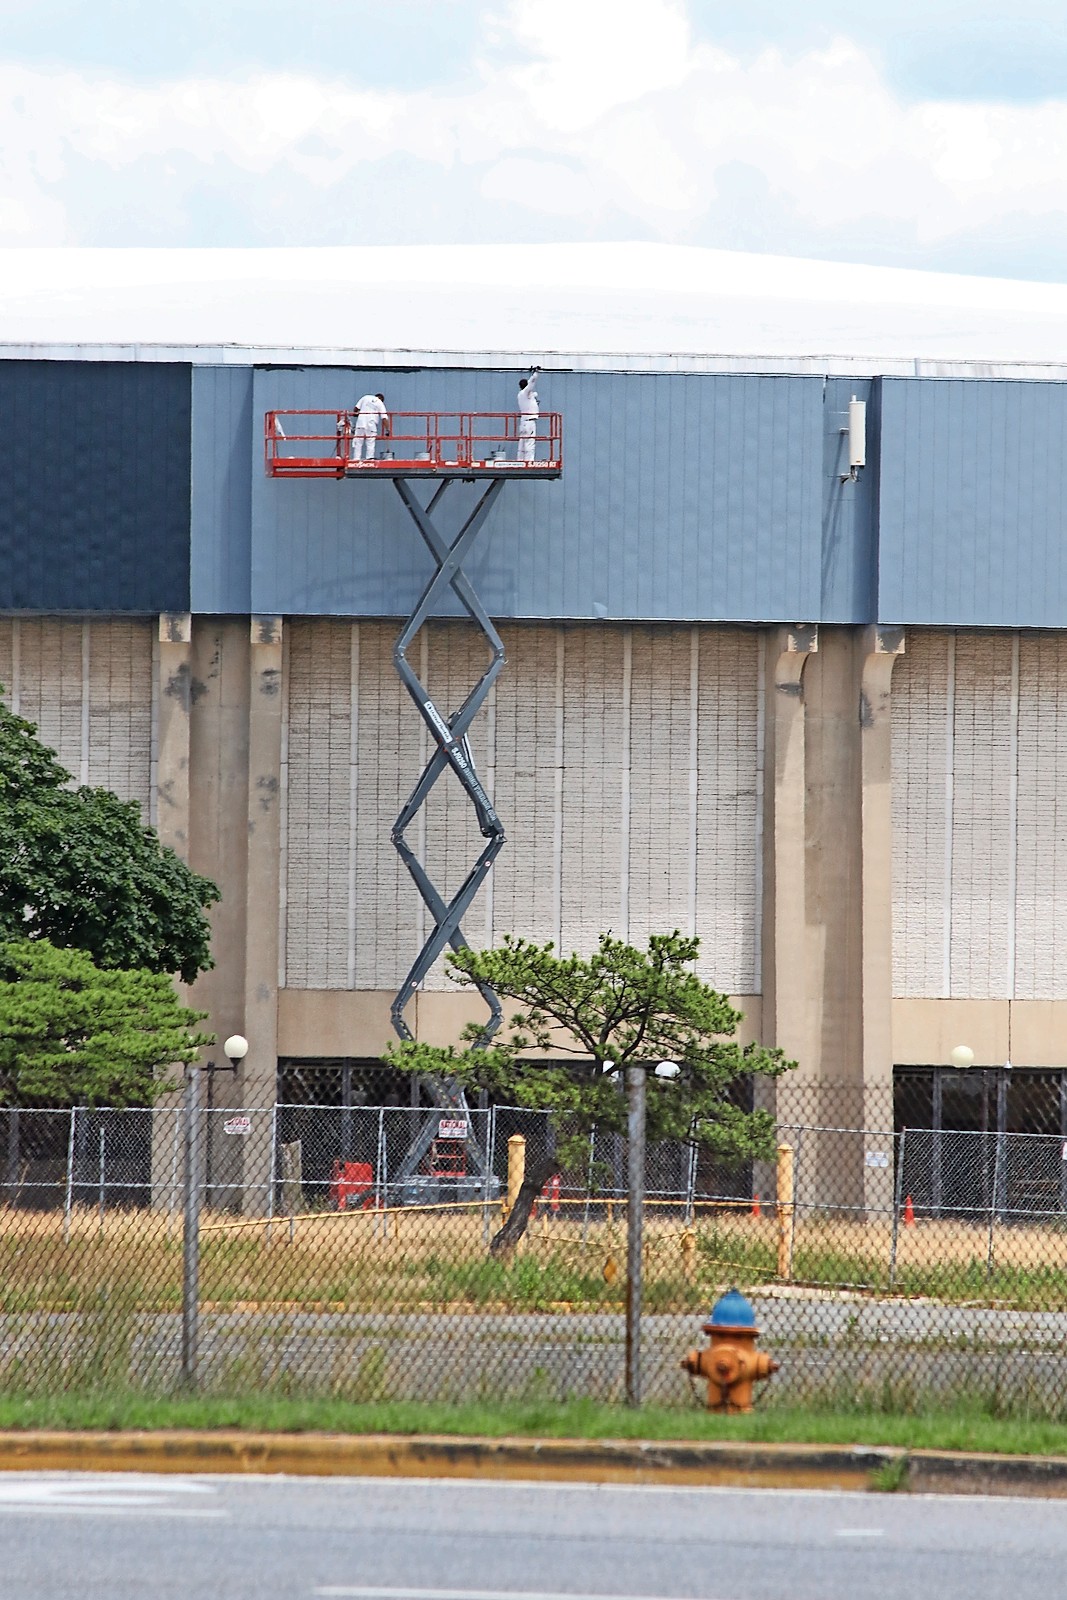 Nassau Coliseum is being painted black, and designers said the dark paint will offer sharp contrast to the new metallic frame that will be installed on the venue.